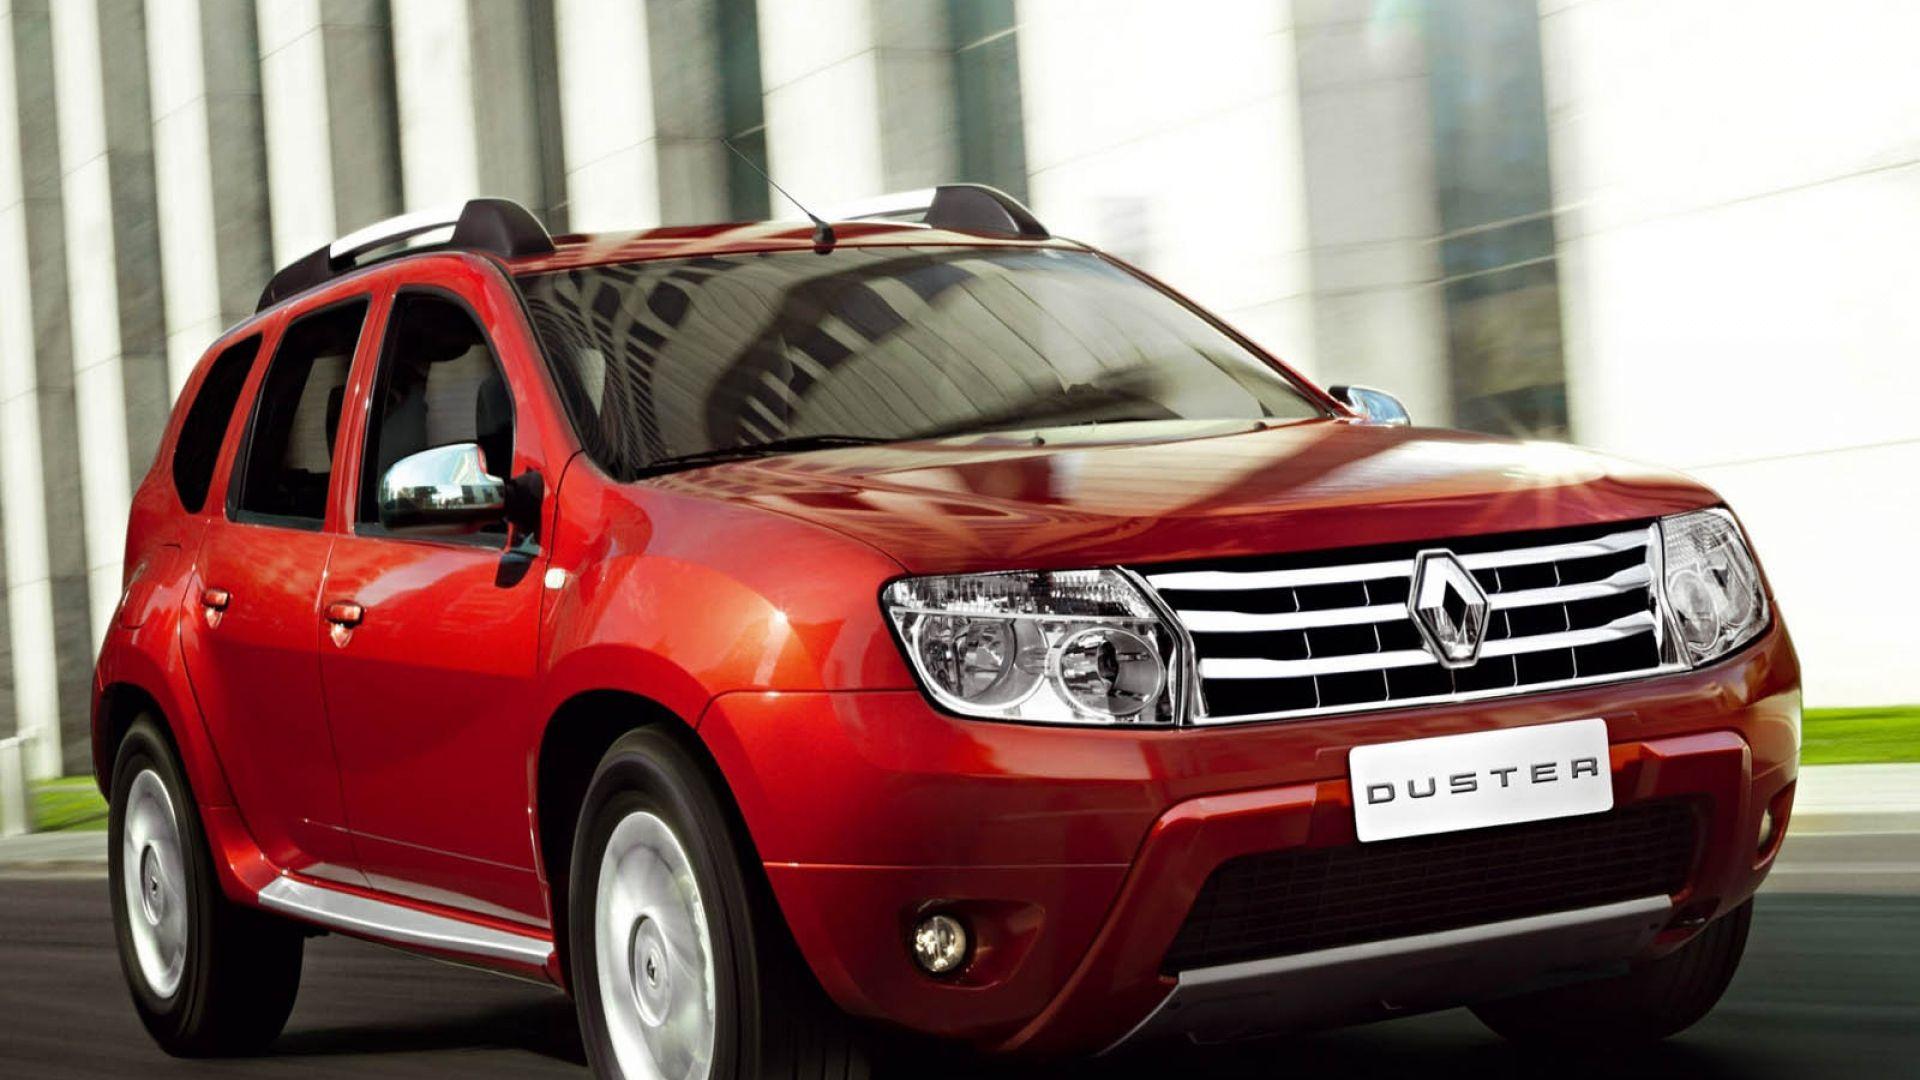 Download Wallpaper 1920x1080 Renault duster, Auto, Red, New